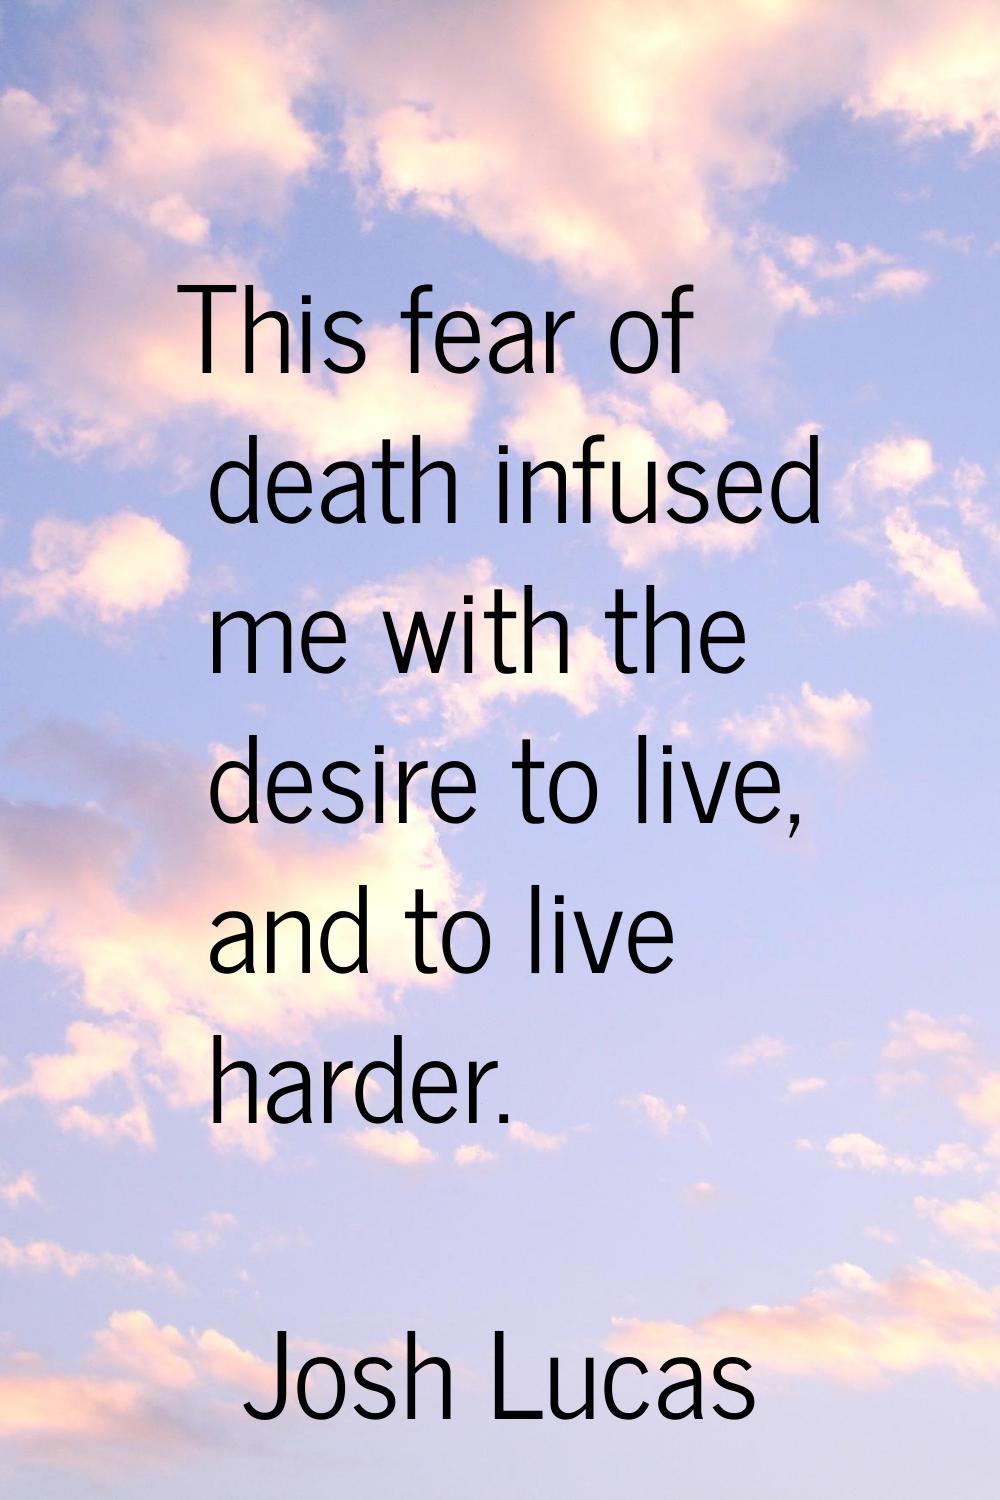 This fear of death infused me with the desire to live, and to live harder.